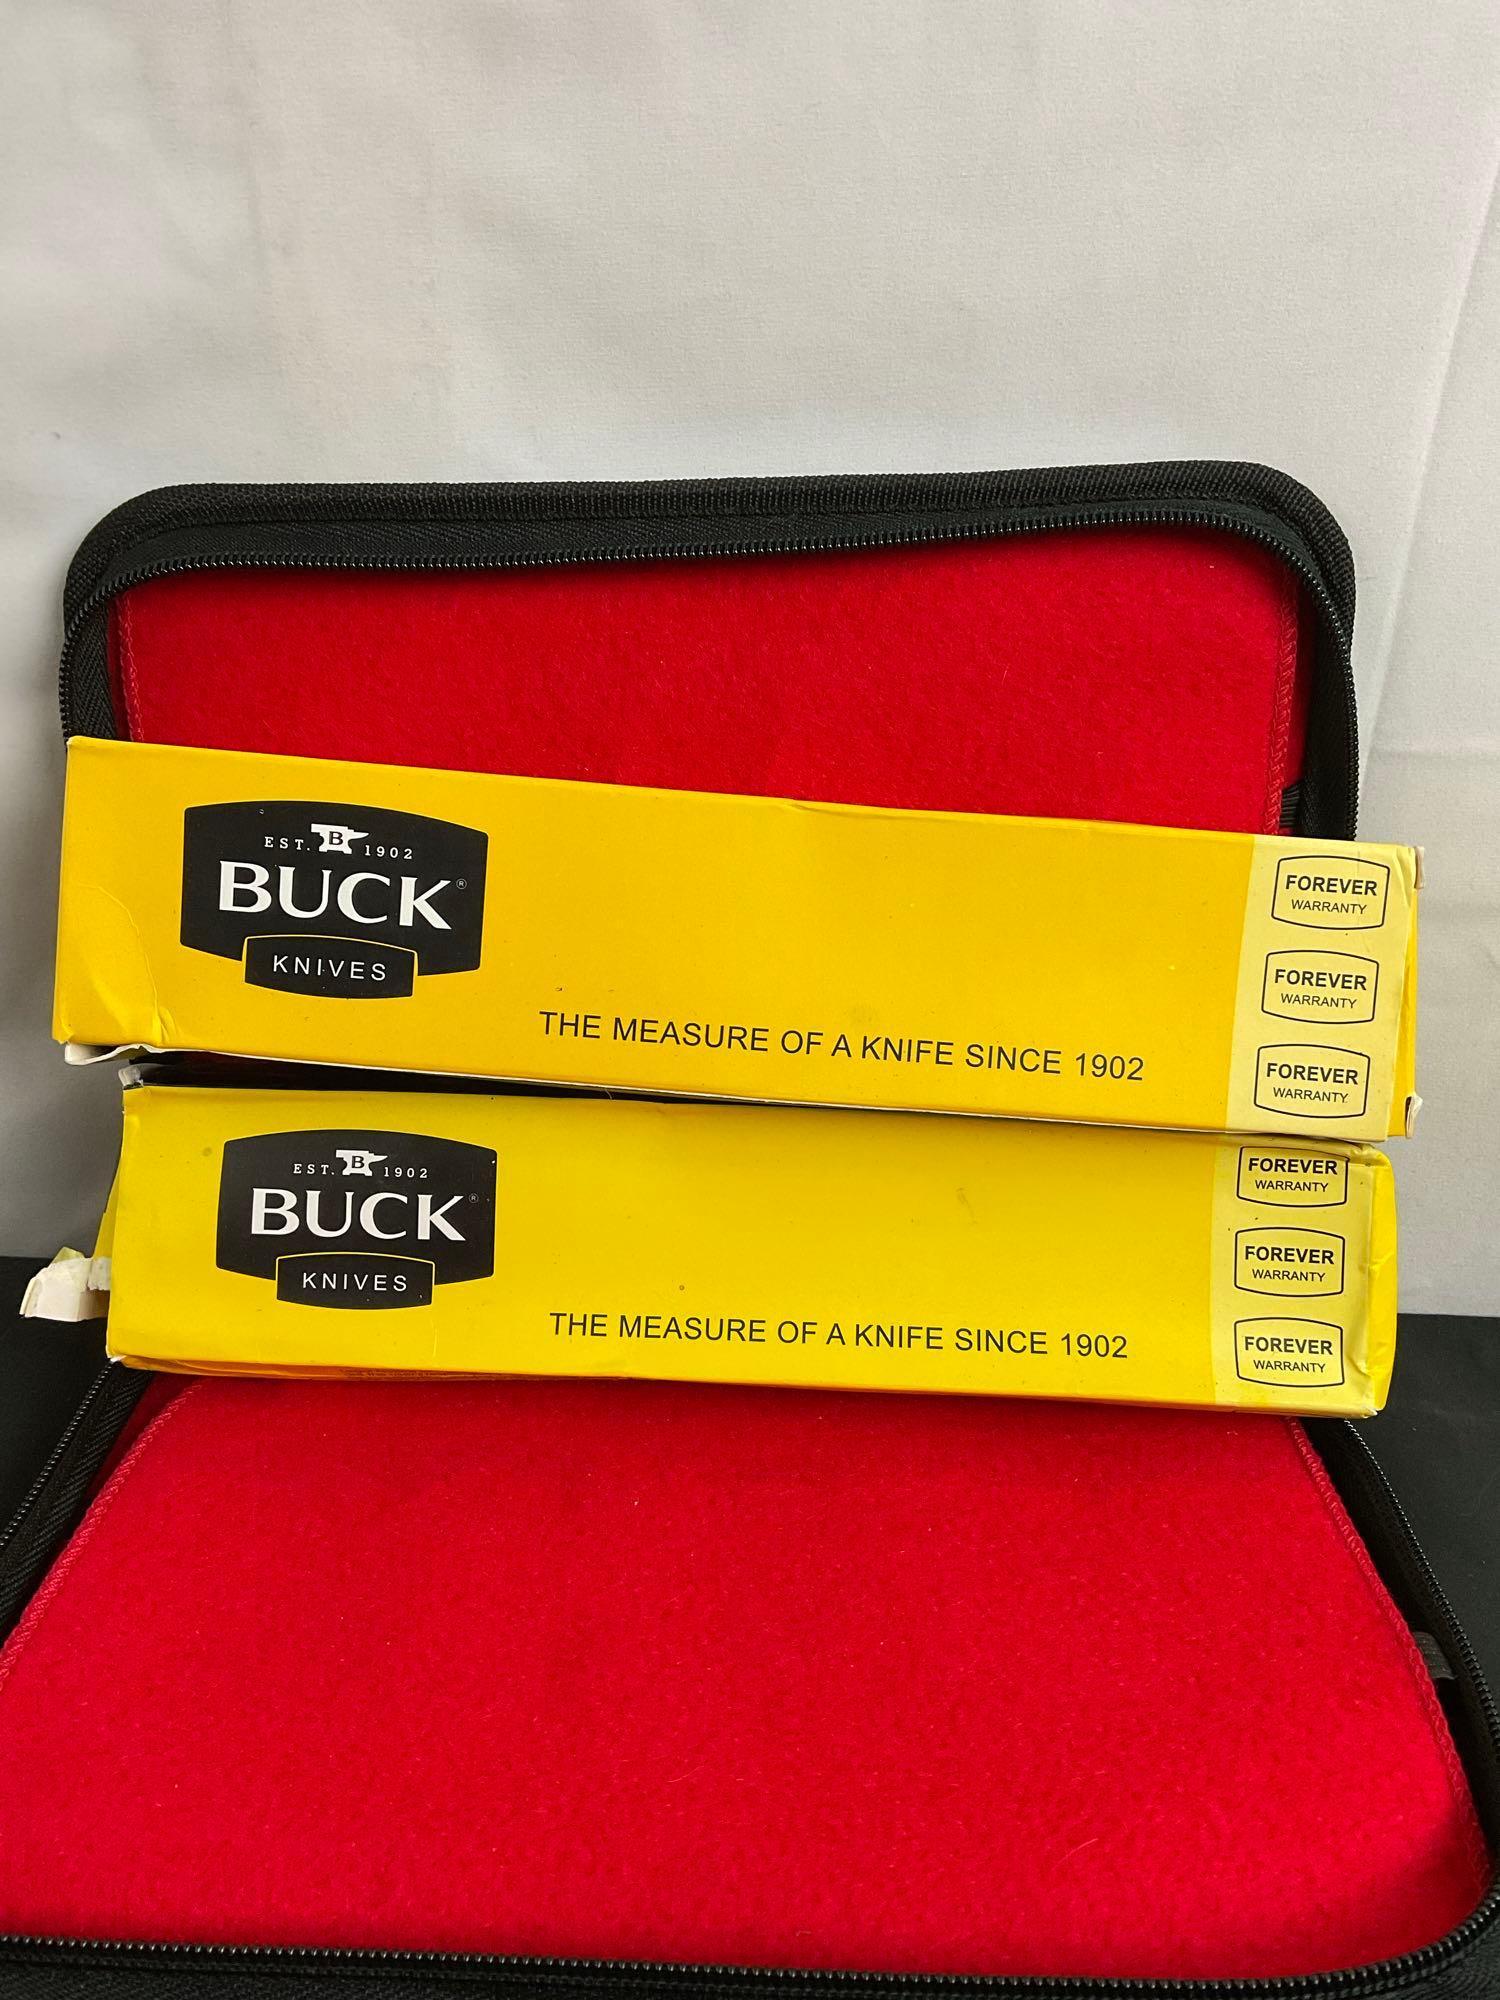 2x New In Box Buck Fixed Blade Knives in Sheathes - Numbered RMEF 480 - See pics